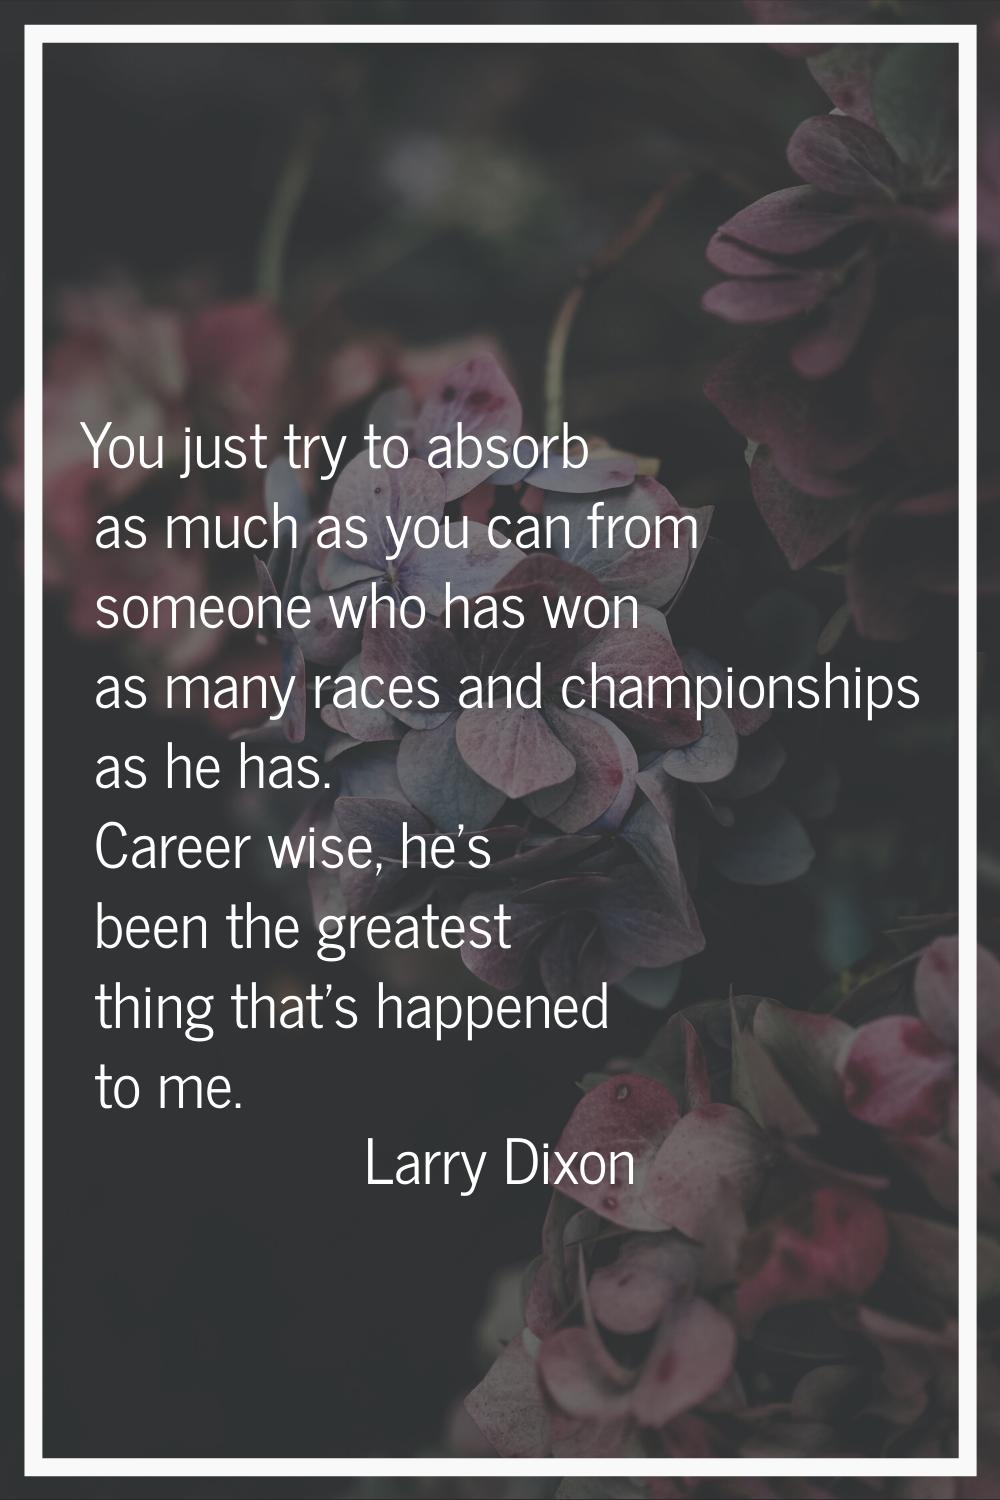 You just try to absorb as much as you can from someone who has won as many races and championships 